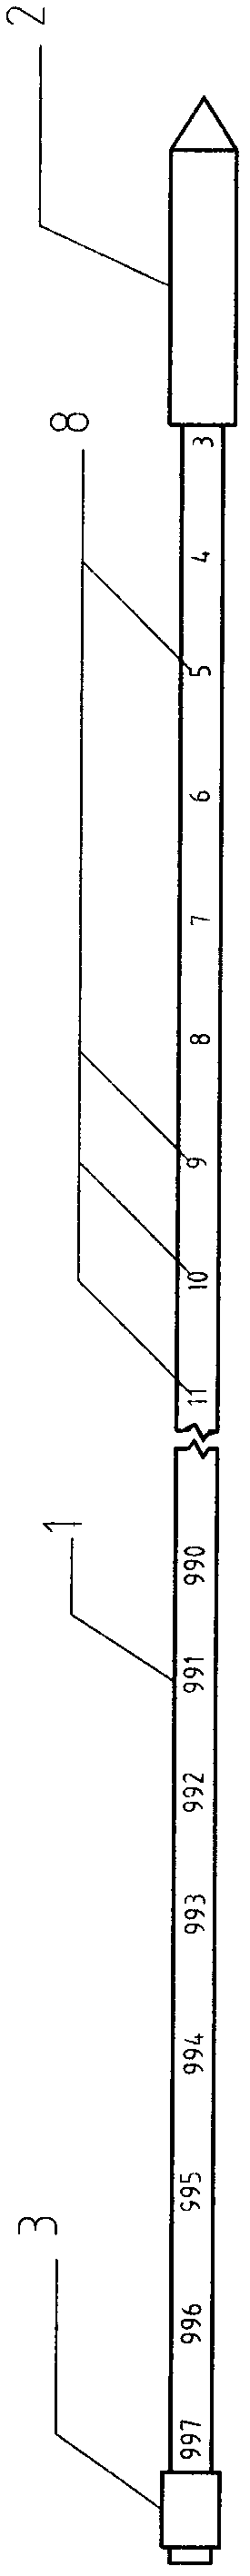 Sensor with permanent depth marks on connecting wires